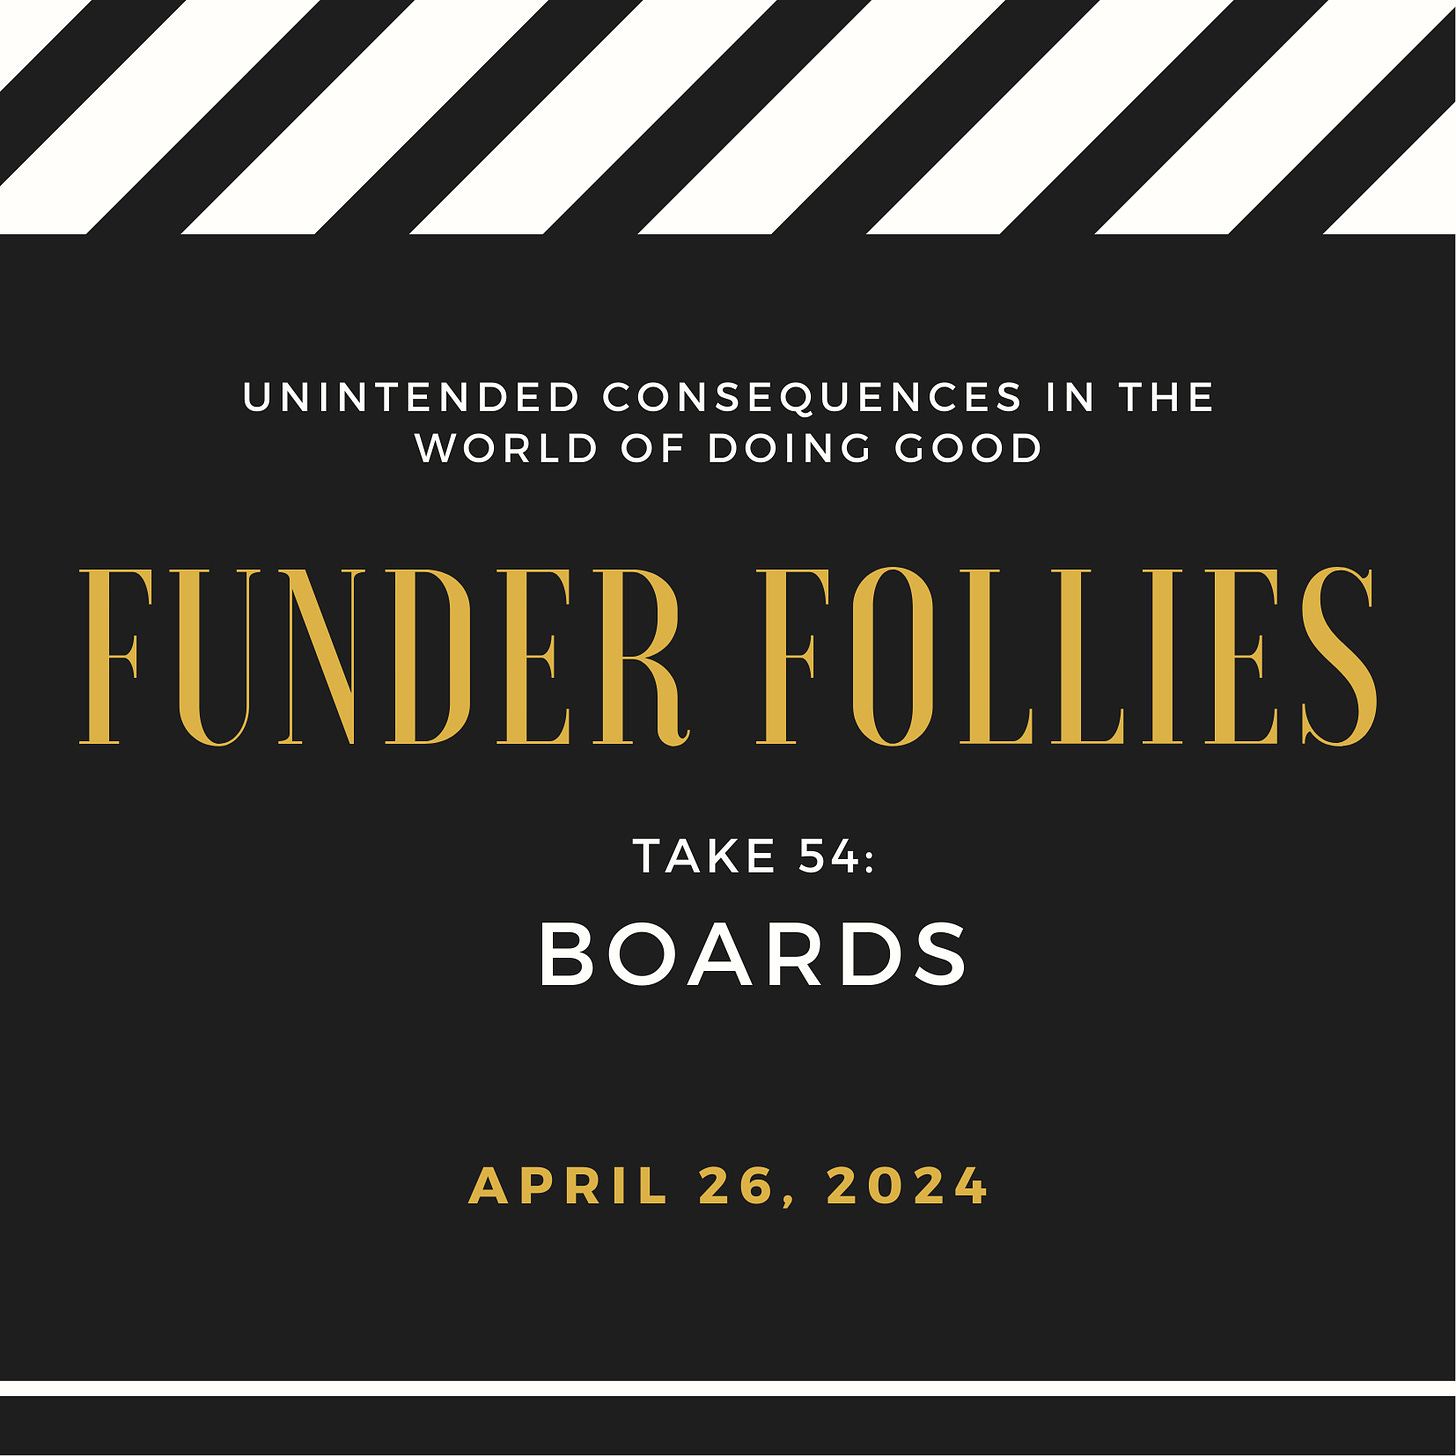 black and white film clapper board showing Funder Follies, Unintended Consequences of Doing Good, Take #54: Boards, April 26, 2024